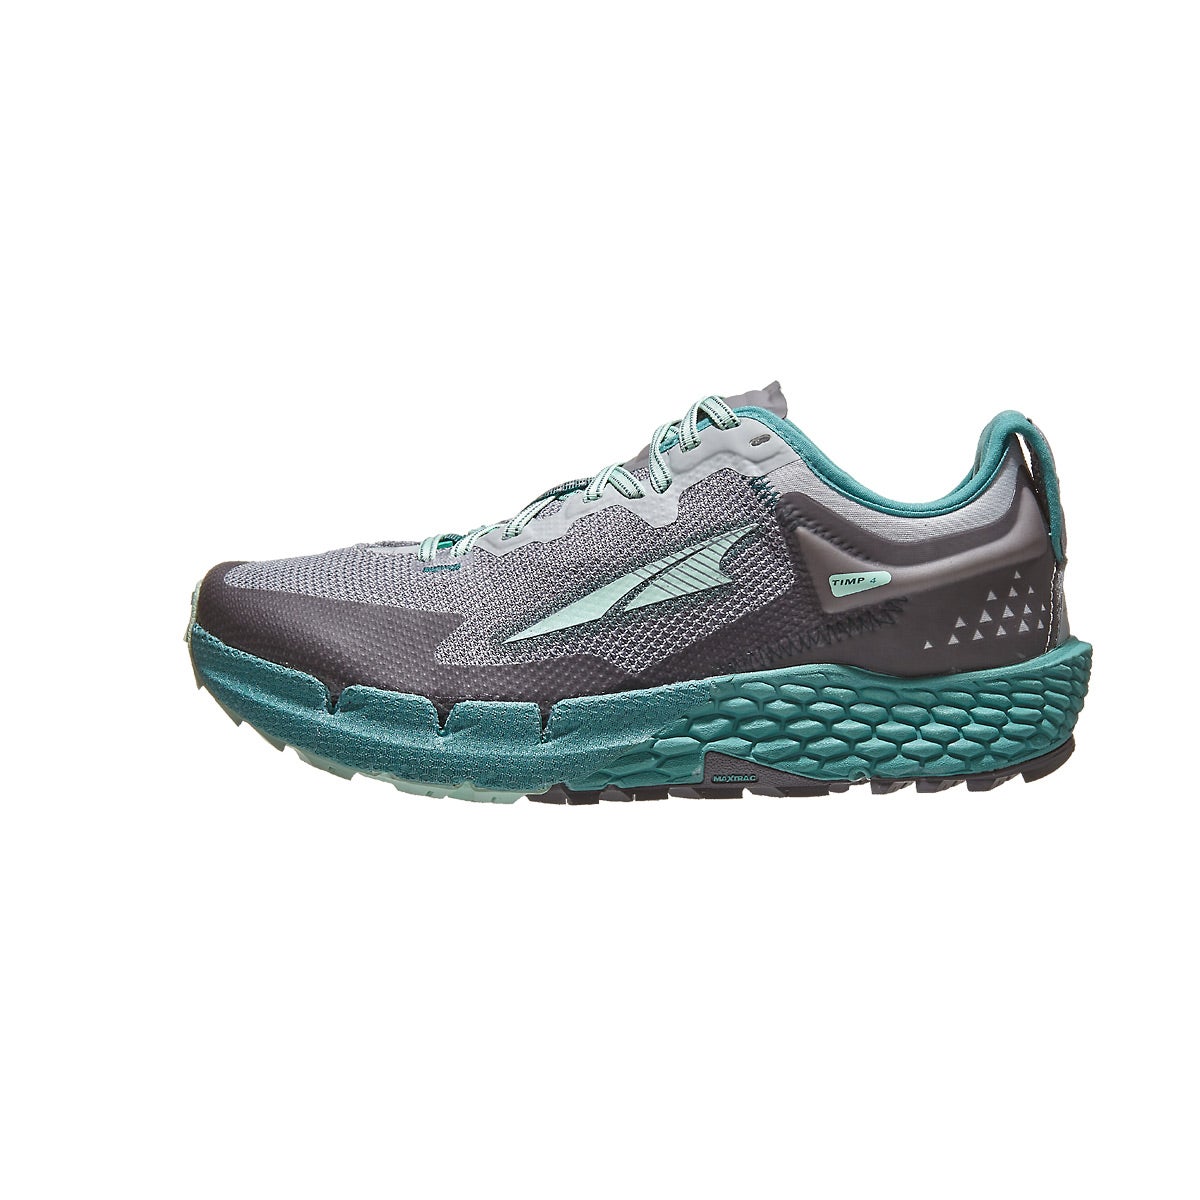 Altra Timp 4 Women's Shoes Gray/Teal 360° View - Tennis Warehouse